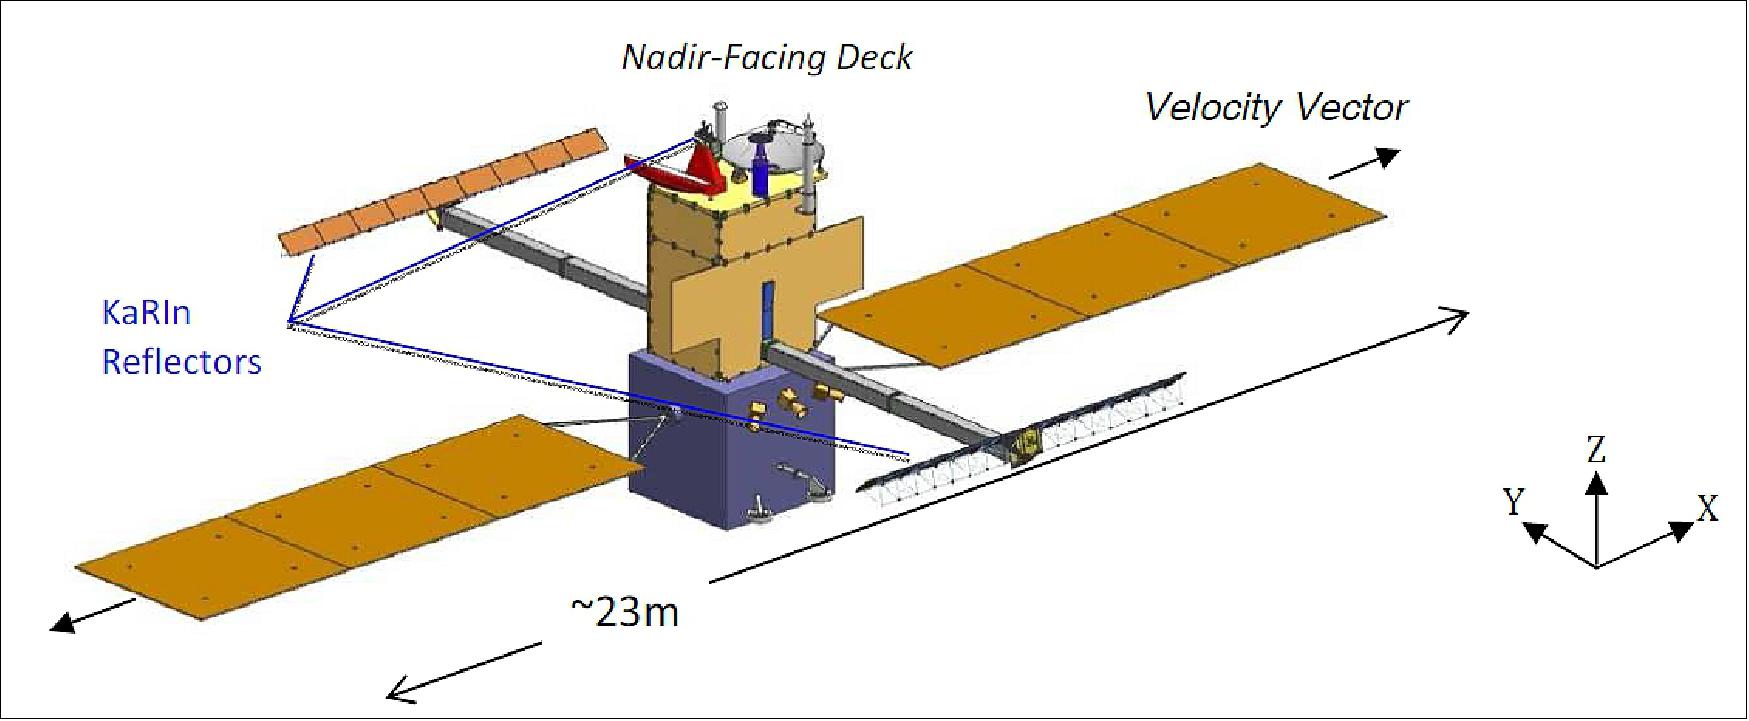 Figure 13: Illustration of the SWOT satellite in deployed configuration (image credit: CNES) 42)